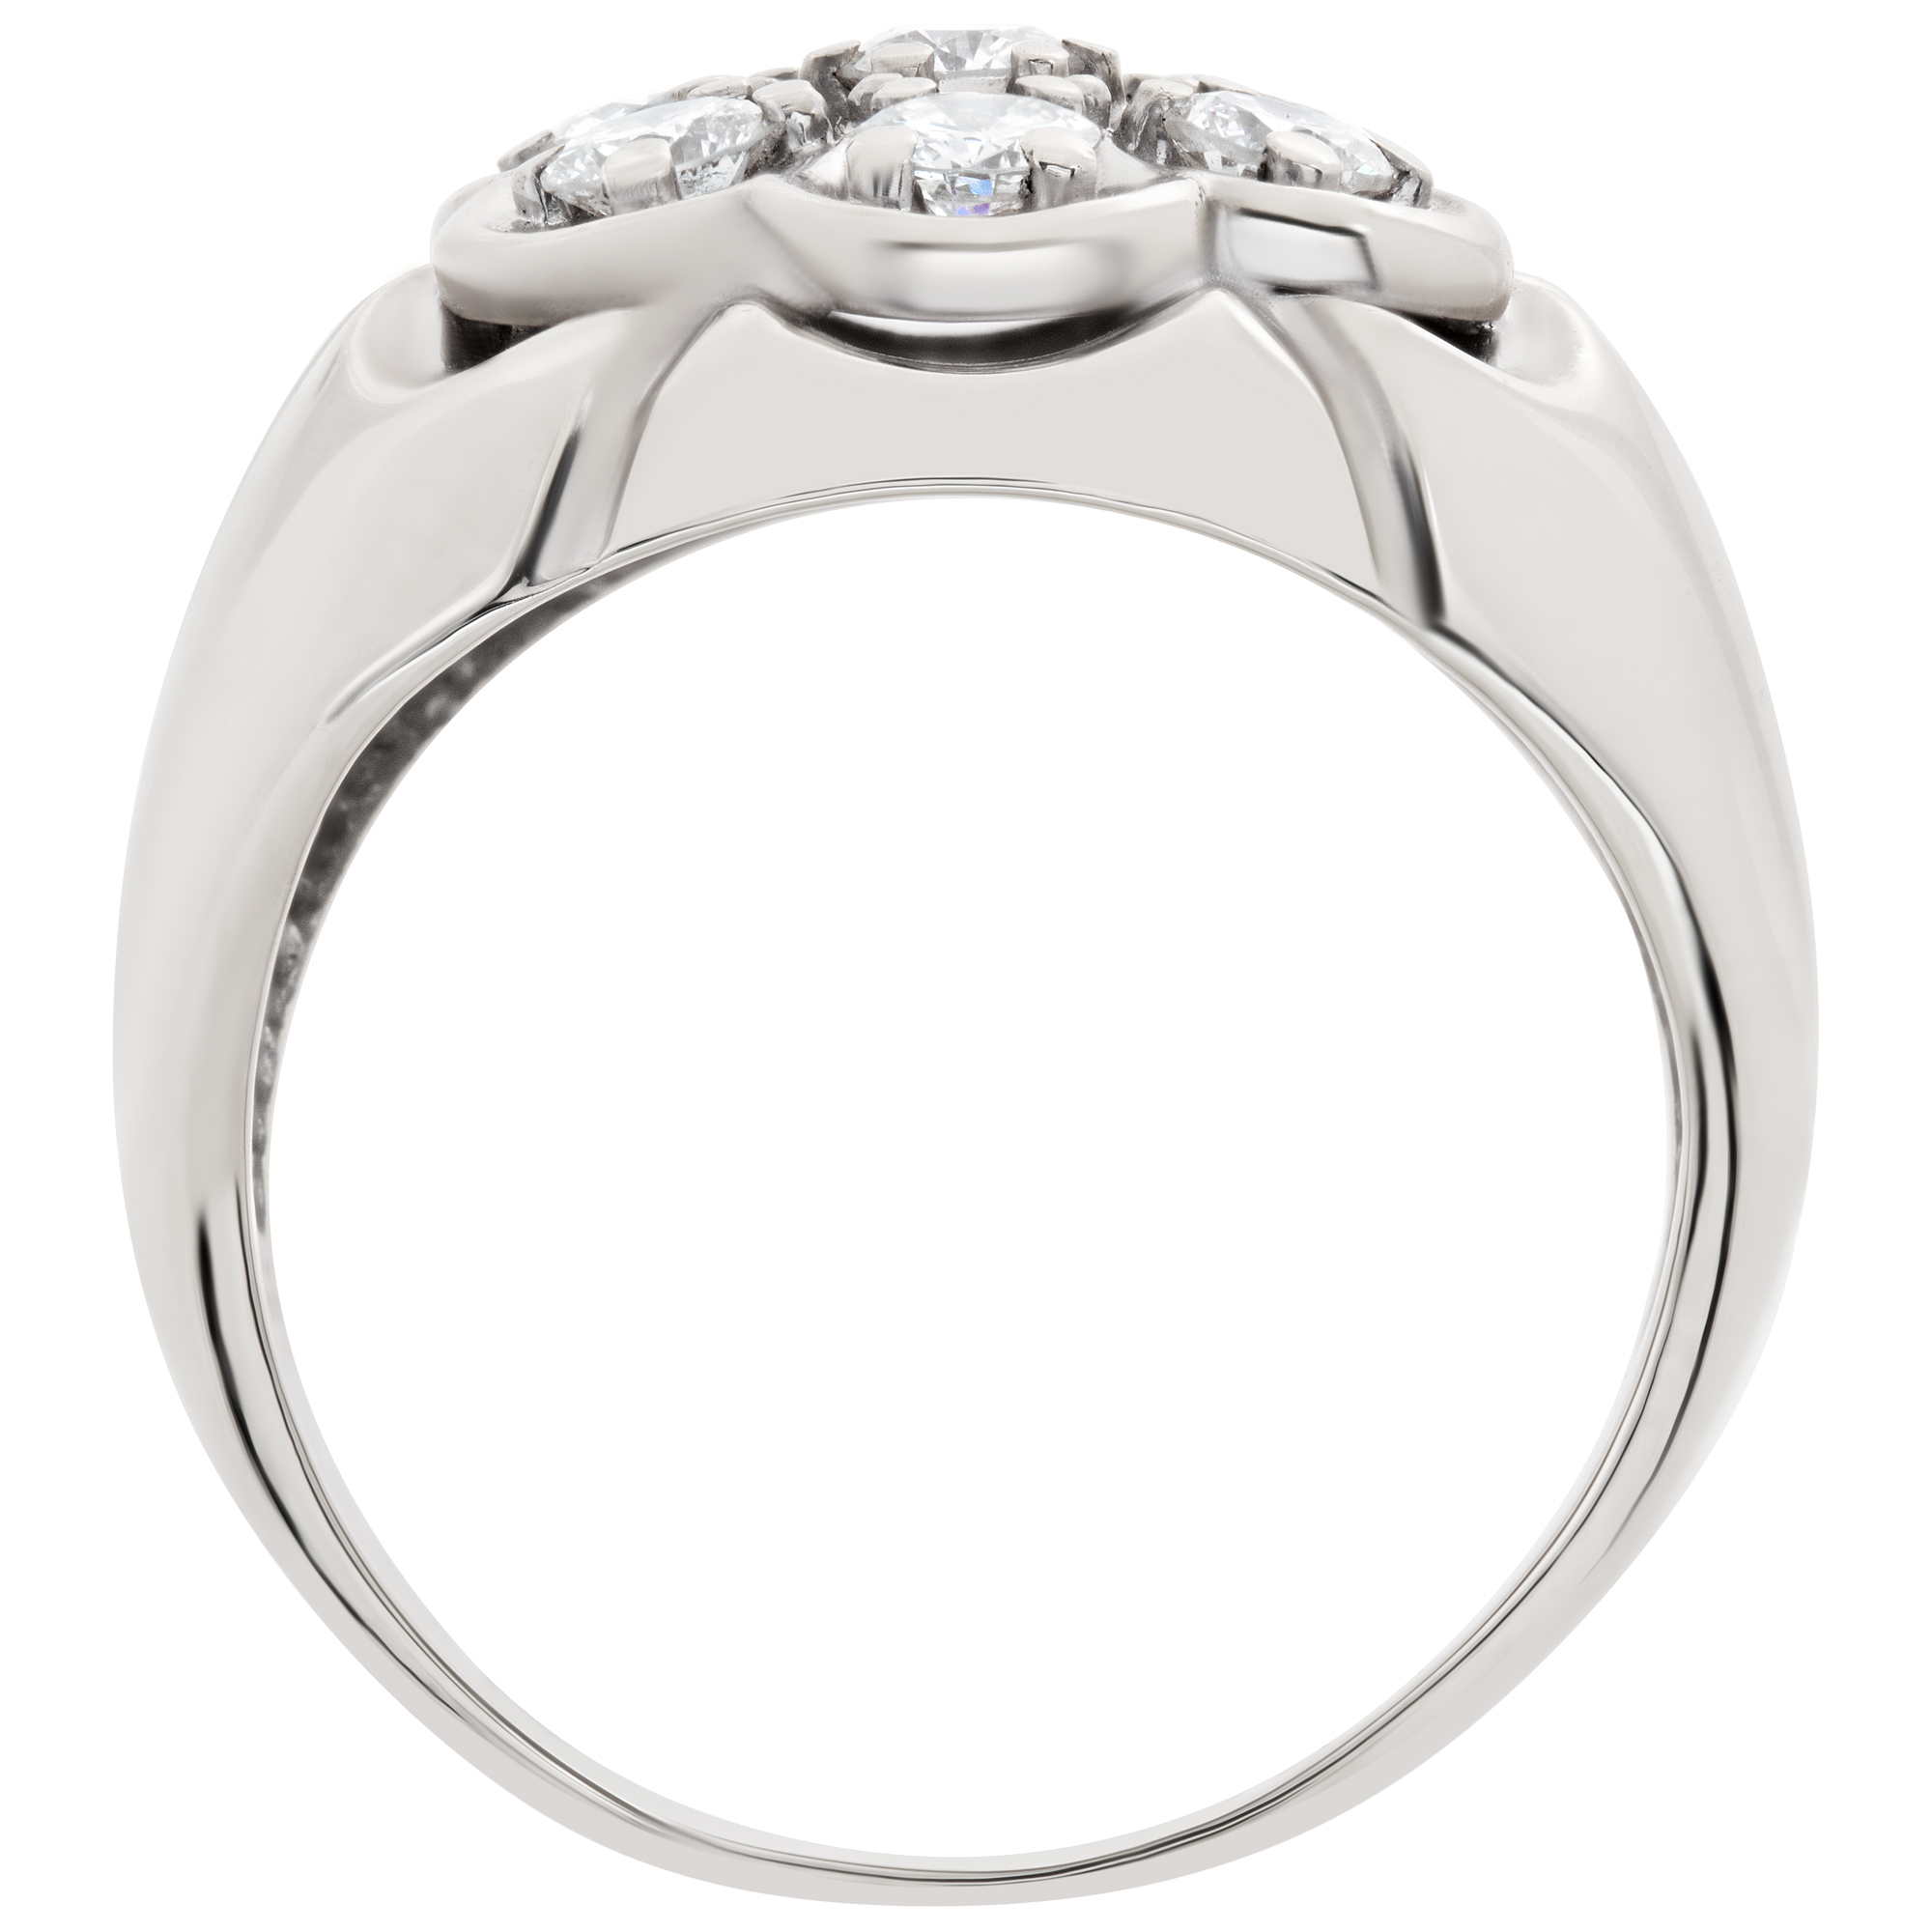 Cluster diamond ring in 14k white gold with approximately 1.00 carat round brilliant cut diamonds image 4